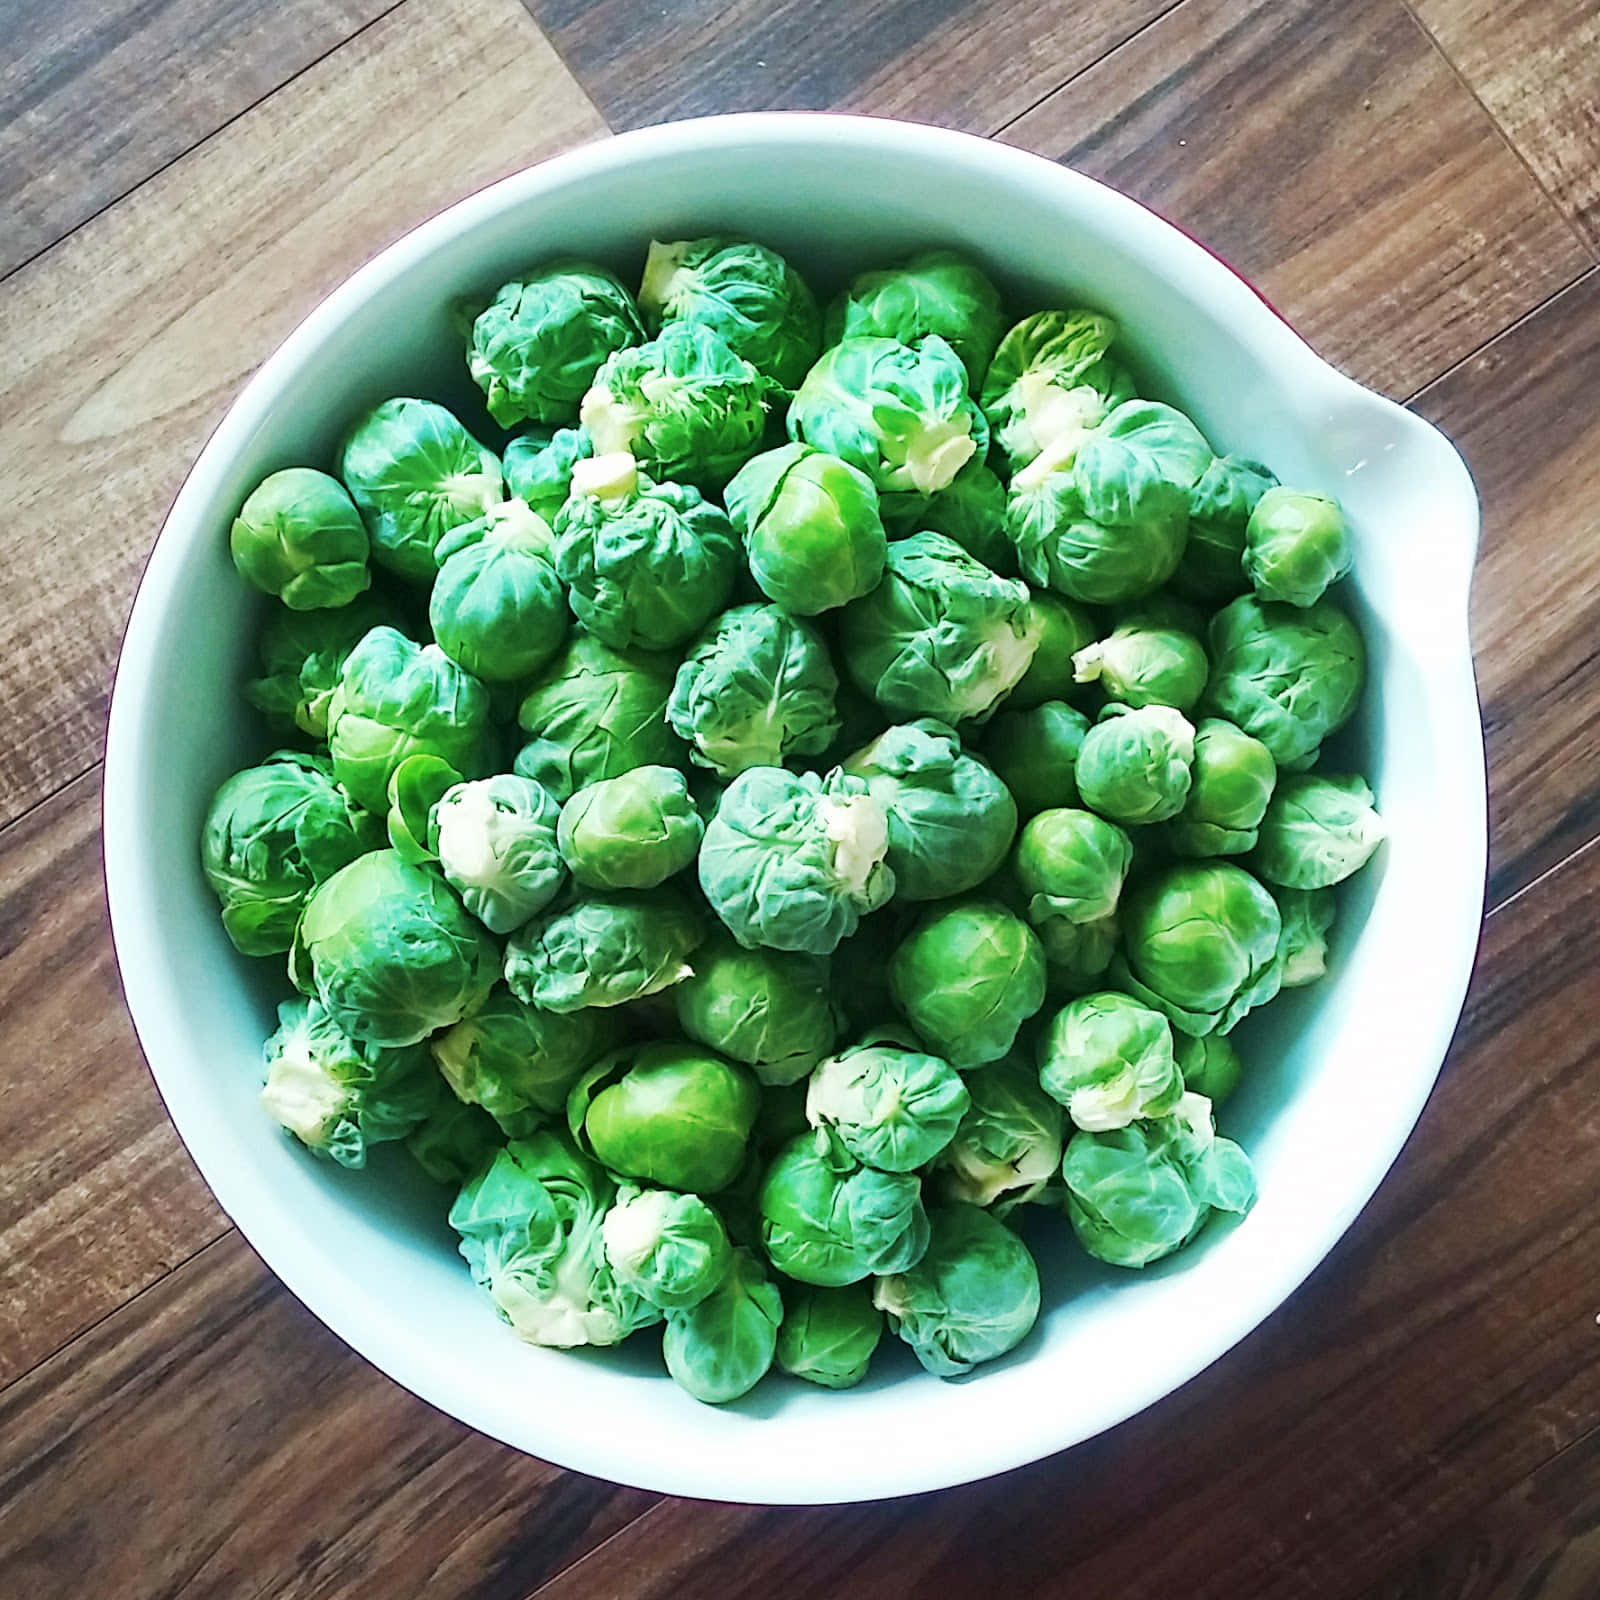 Enjoy the nutritious goodness of Brussels Sprouts